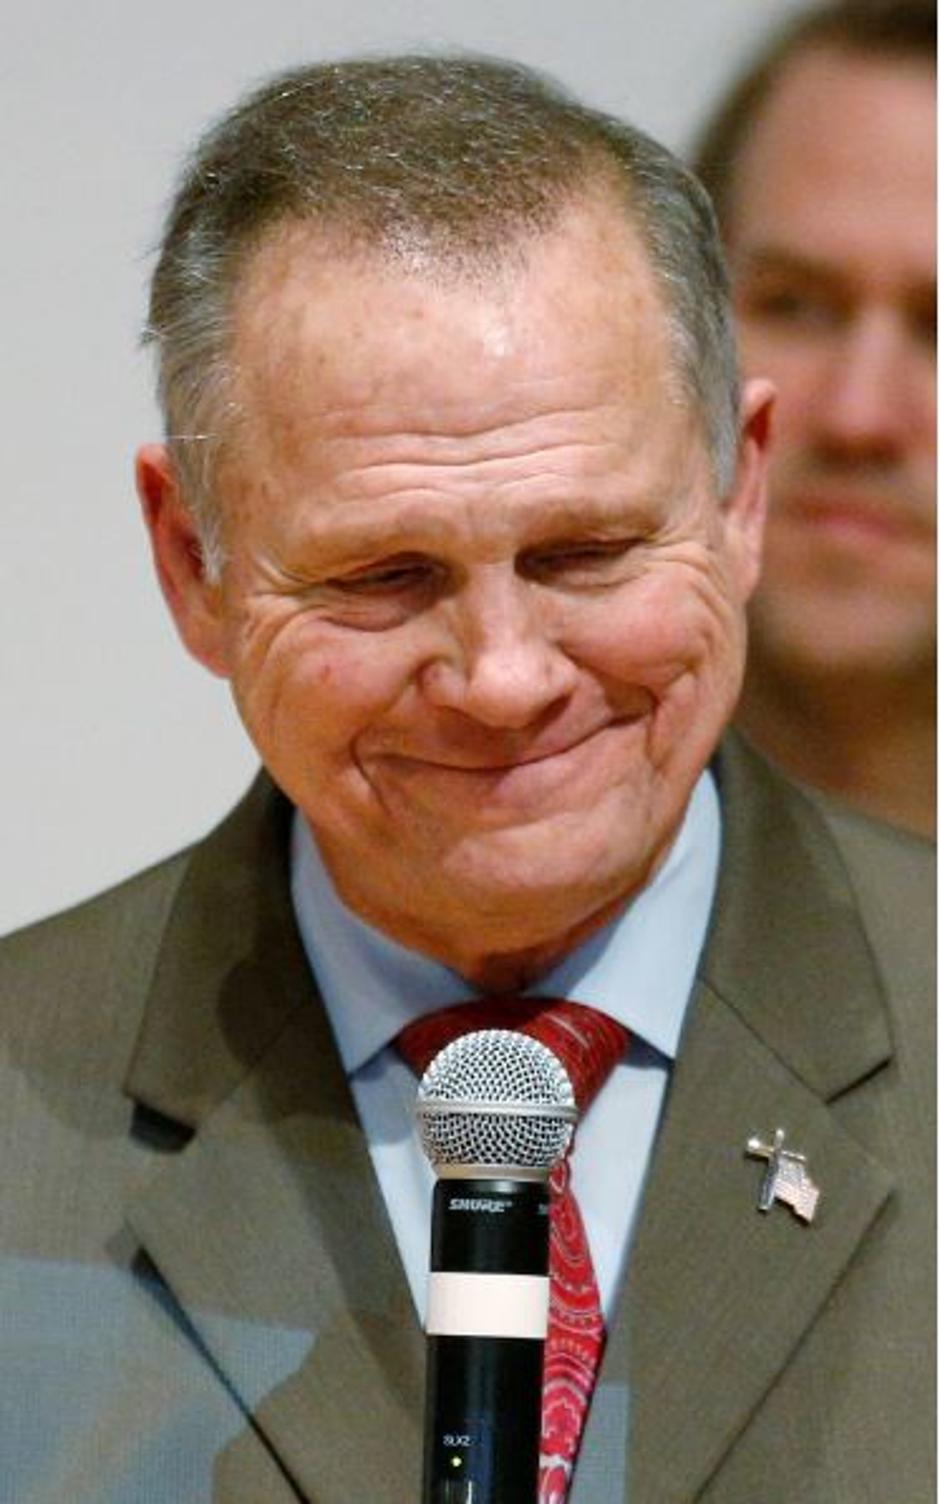 Roy Moore | Author: Reuters Photographer/REUTERS/PIXSELL